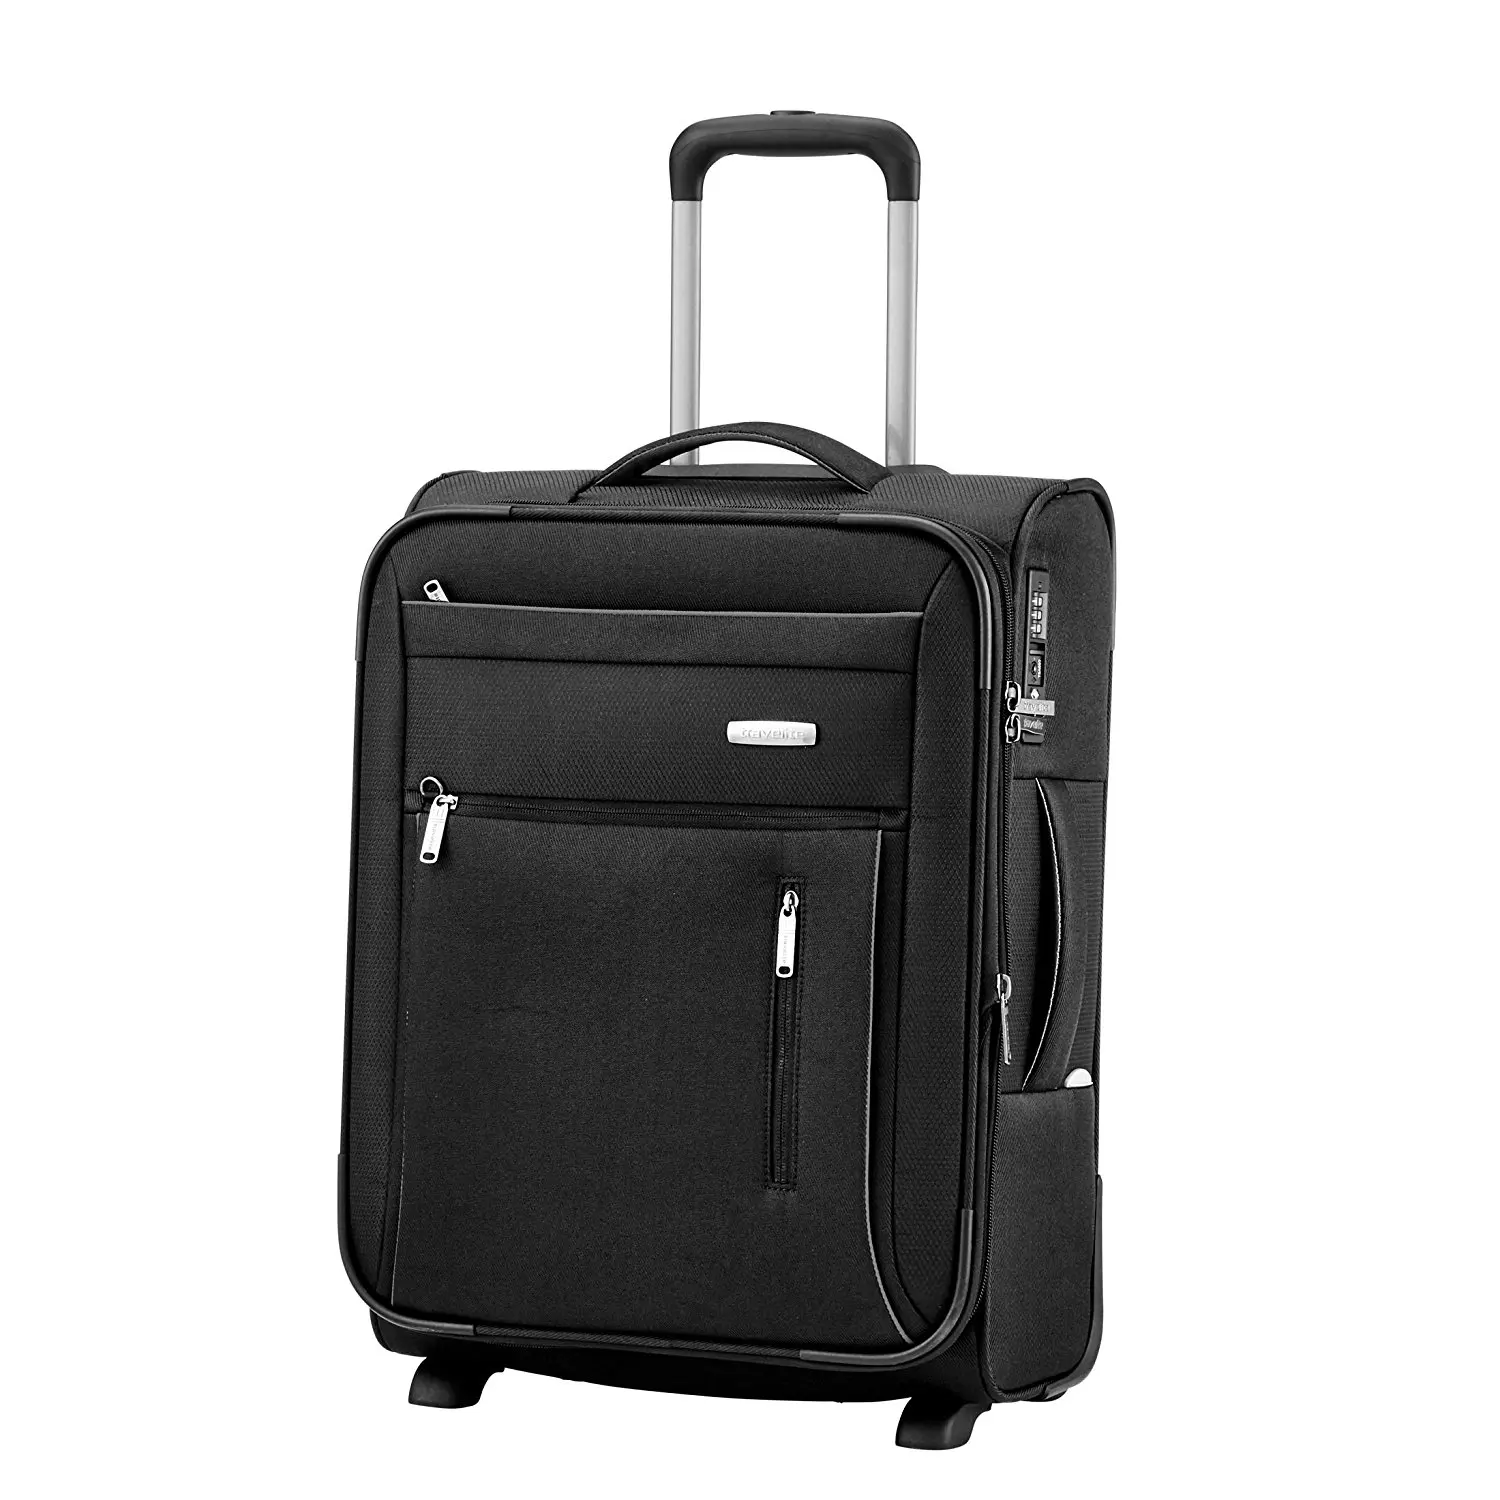 Cheap Travelite Luggage, find Travelite Luggage deals on line at ...